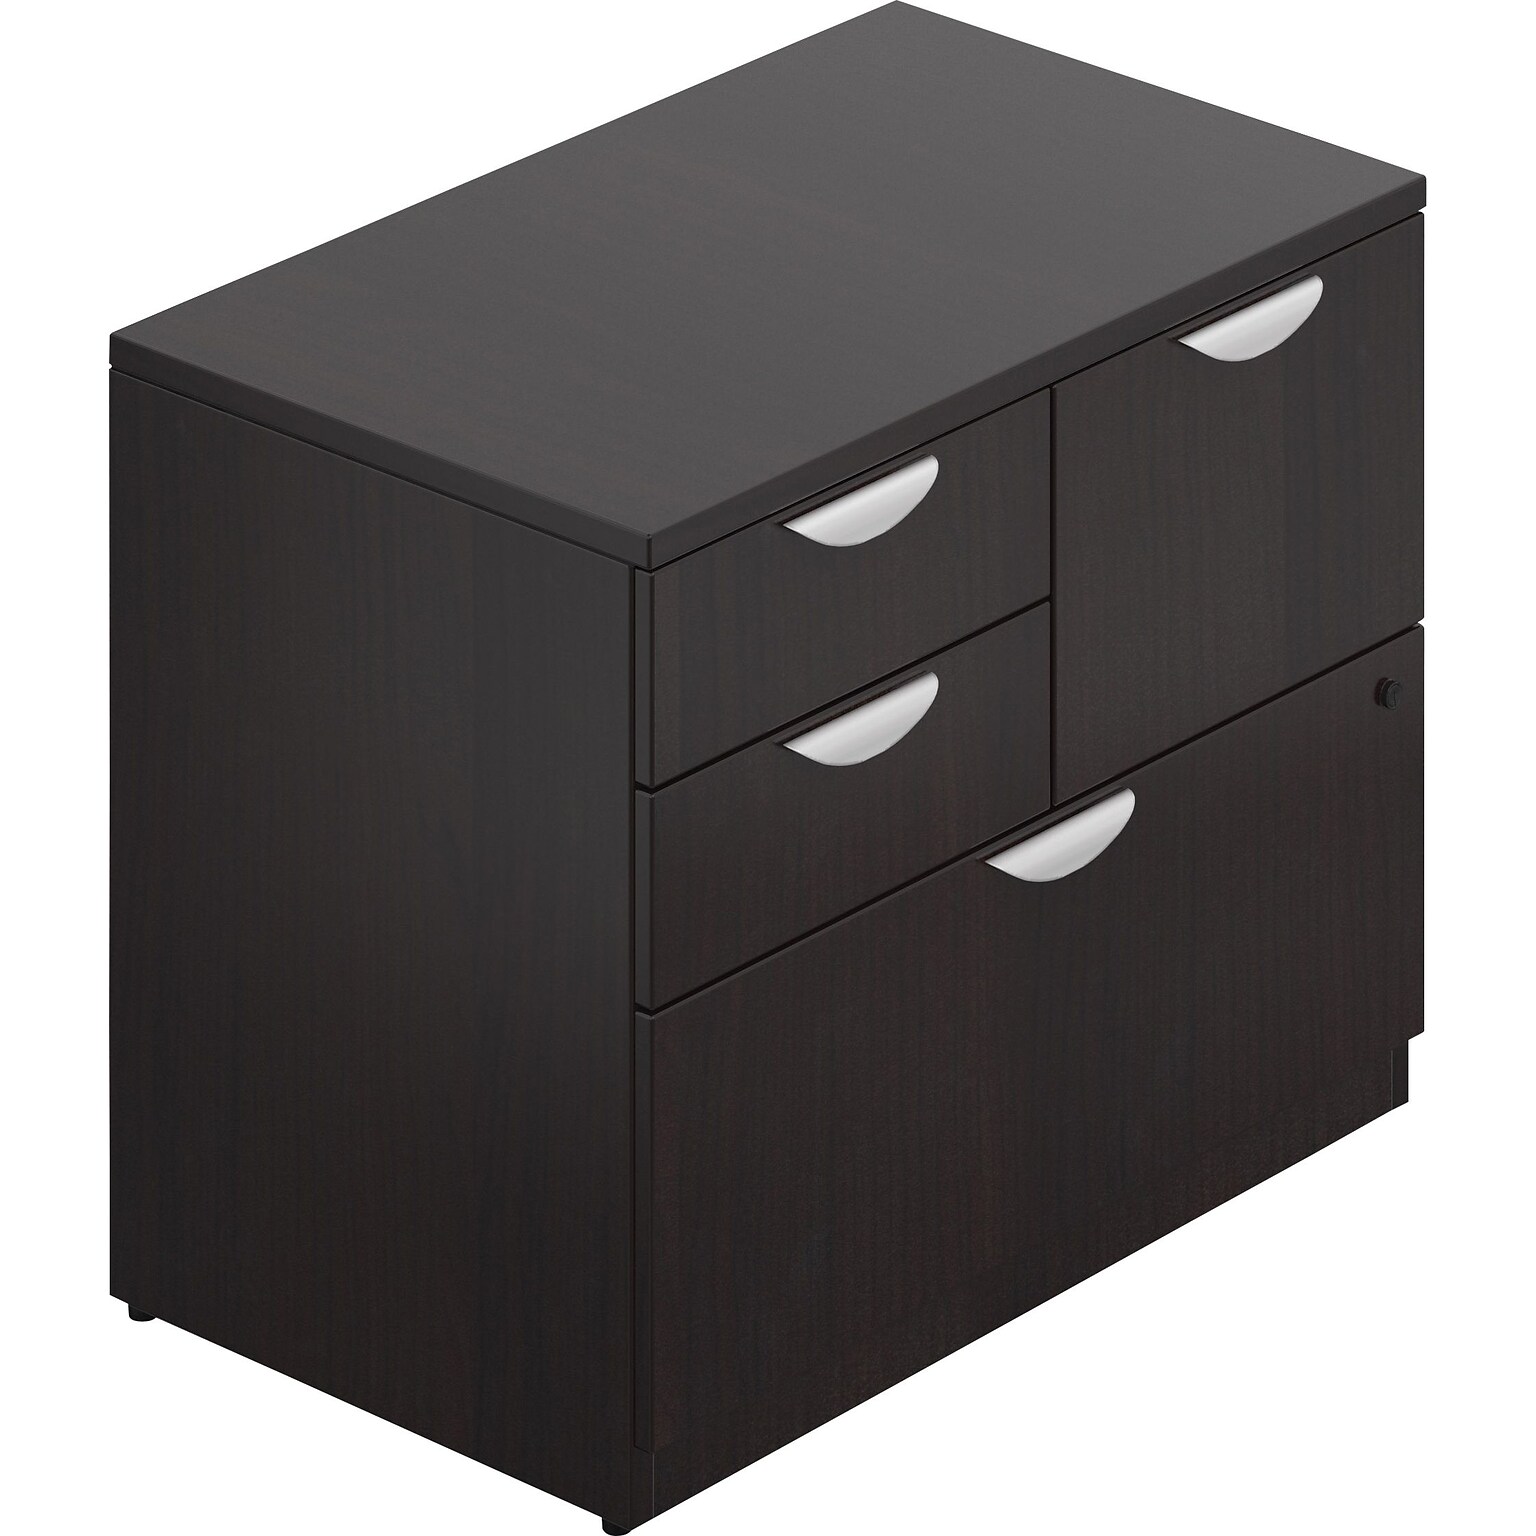 Offices to Go Superior Laminate Mixed Storage Unit with Lock, American Espresso, 36W x 22D x 29.5H